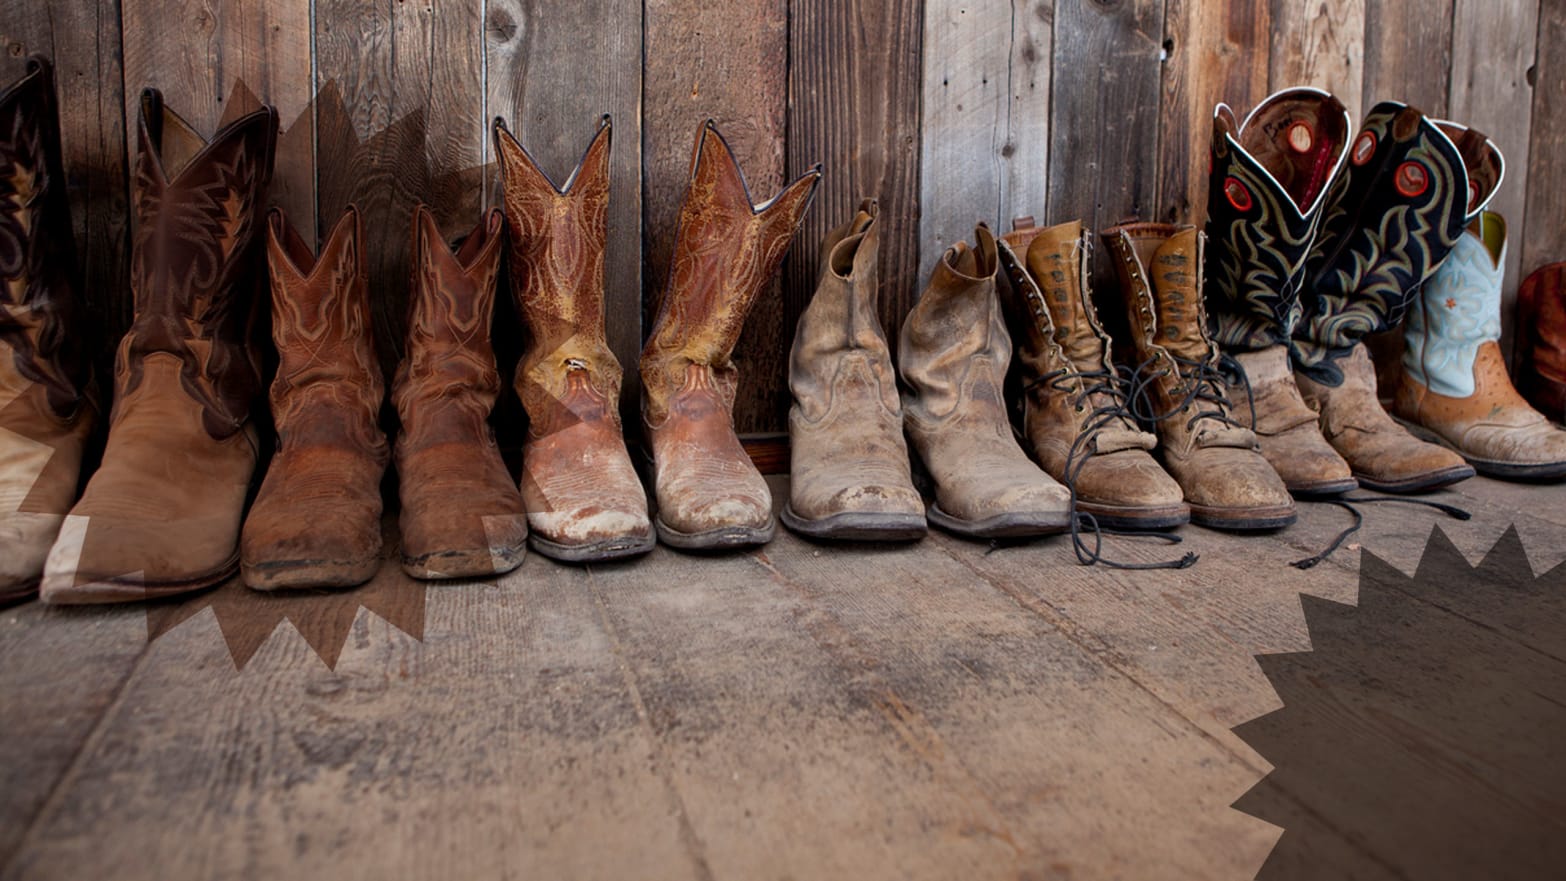 Western Boots Trend Through the Years: Best Photos From the